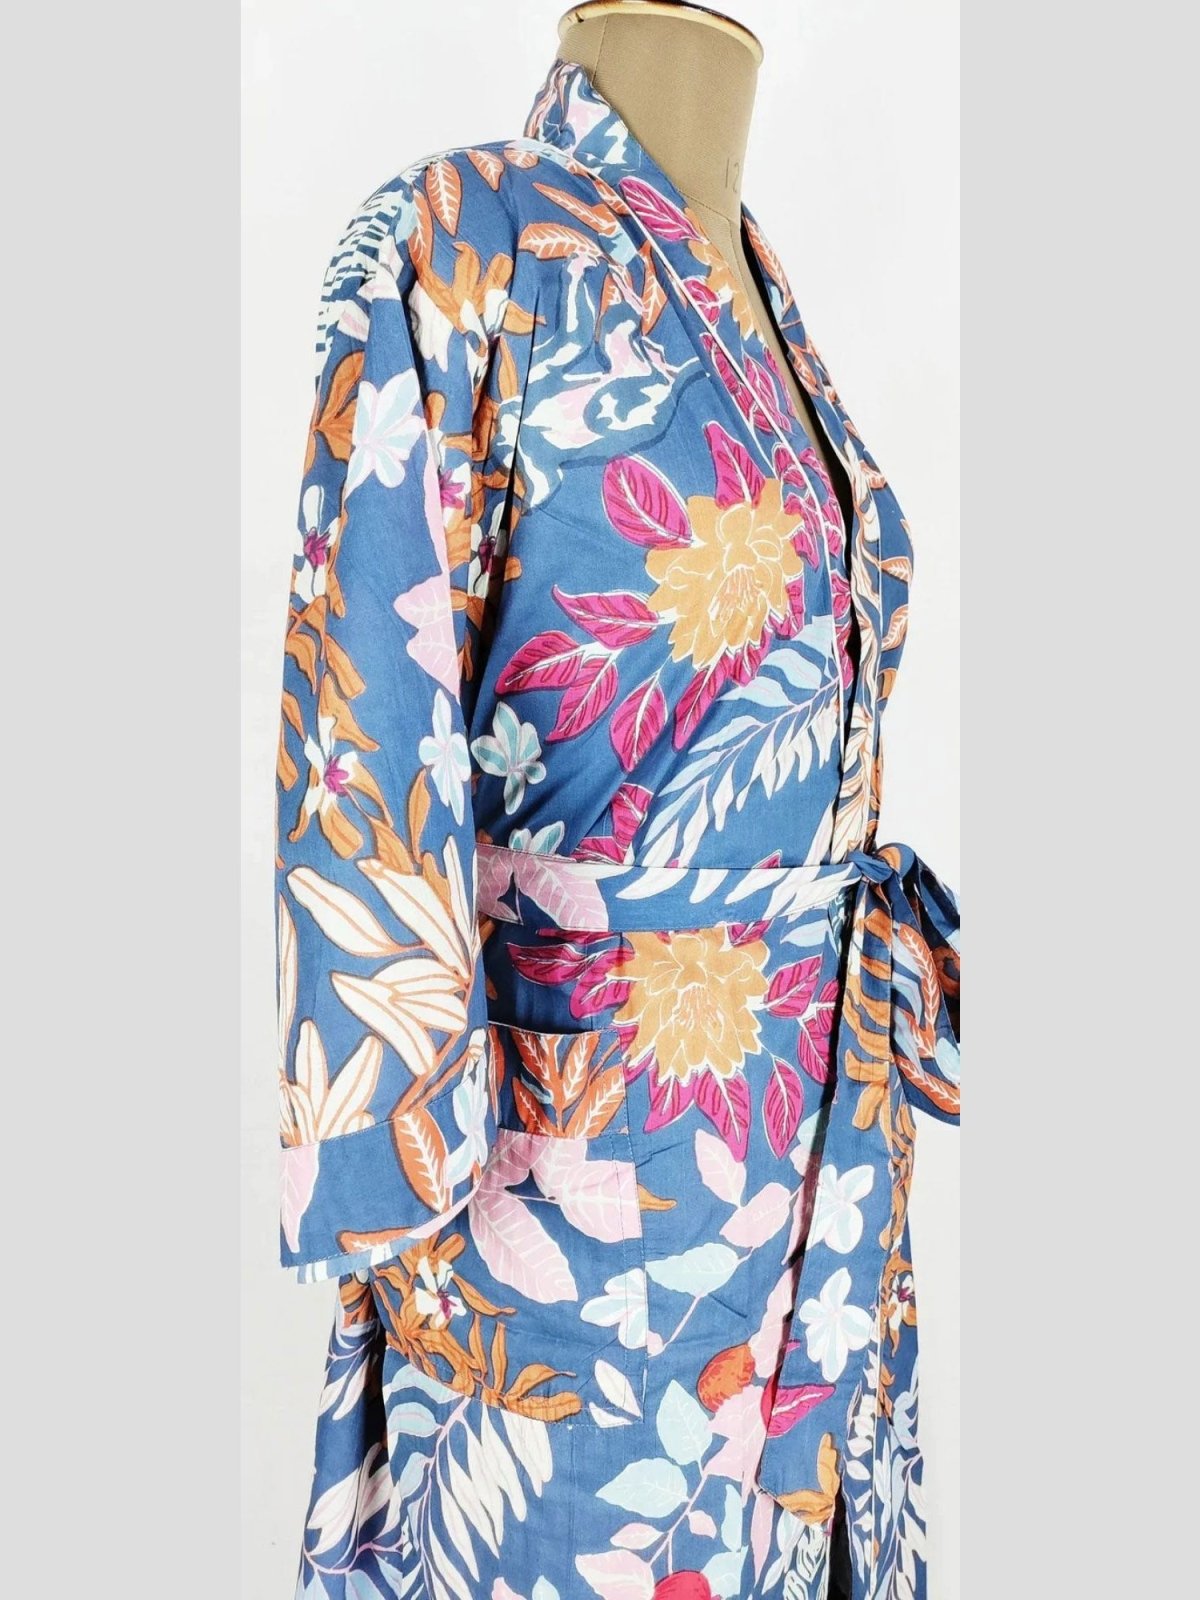 Pure Cotton Indian Handprinted House Robe Summer Kimono | Blue Pink Floral Beach Coverup/Comfy Maternity Mom - The Eastern Loom